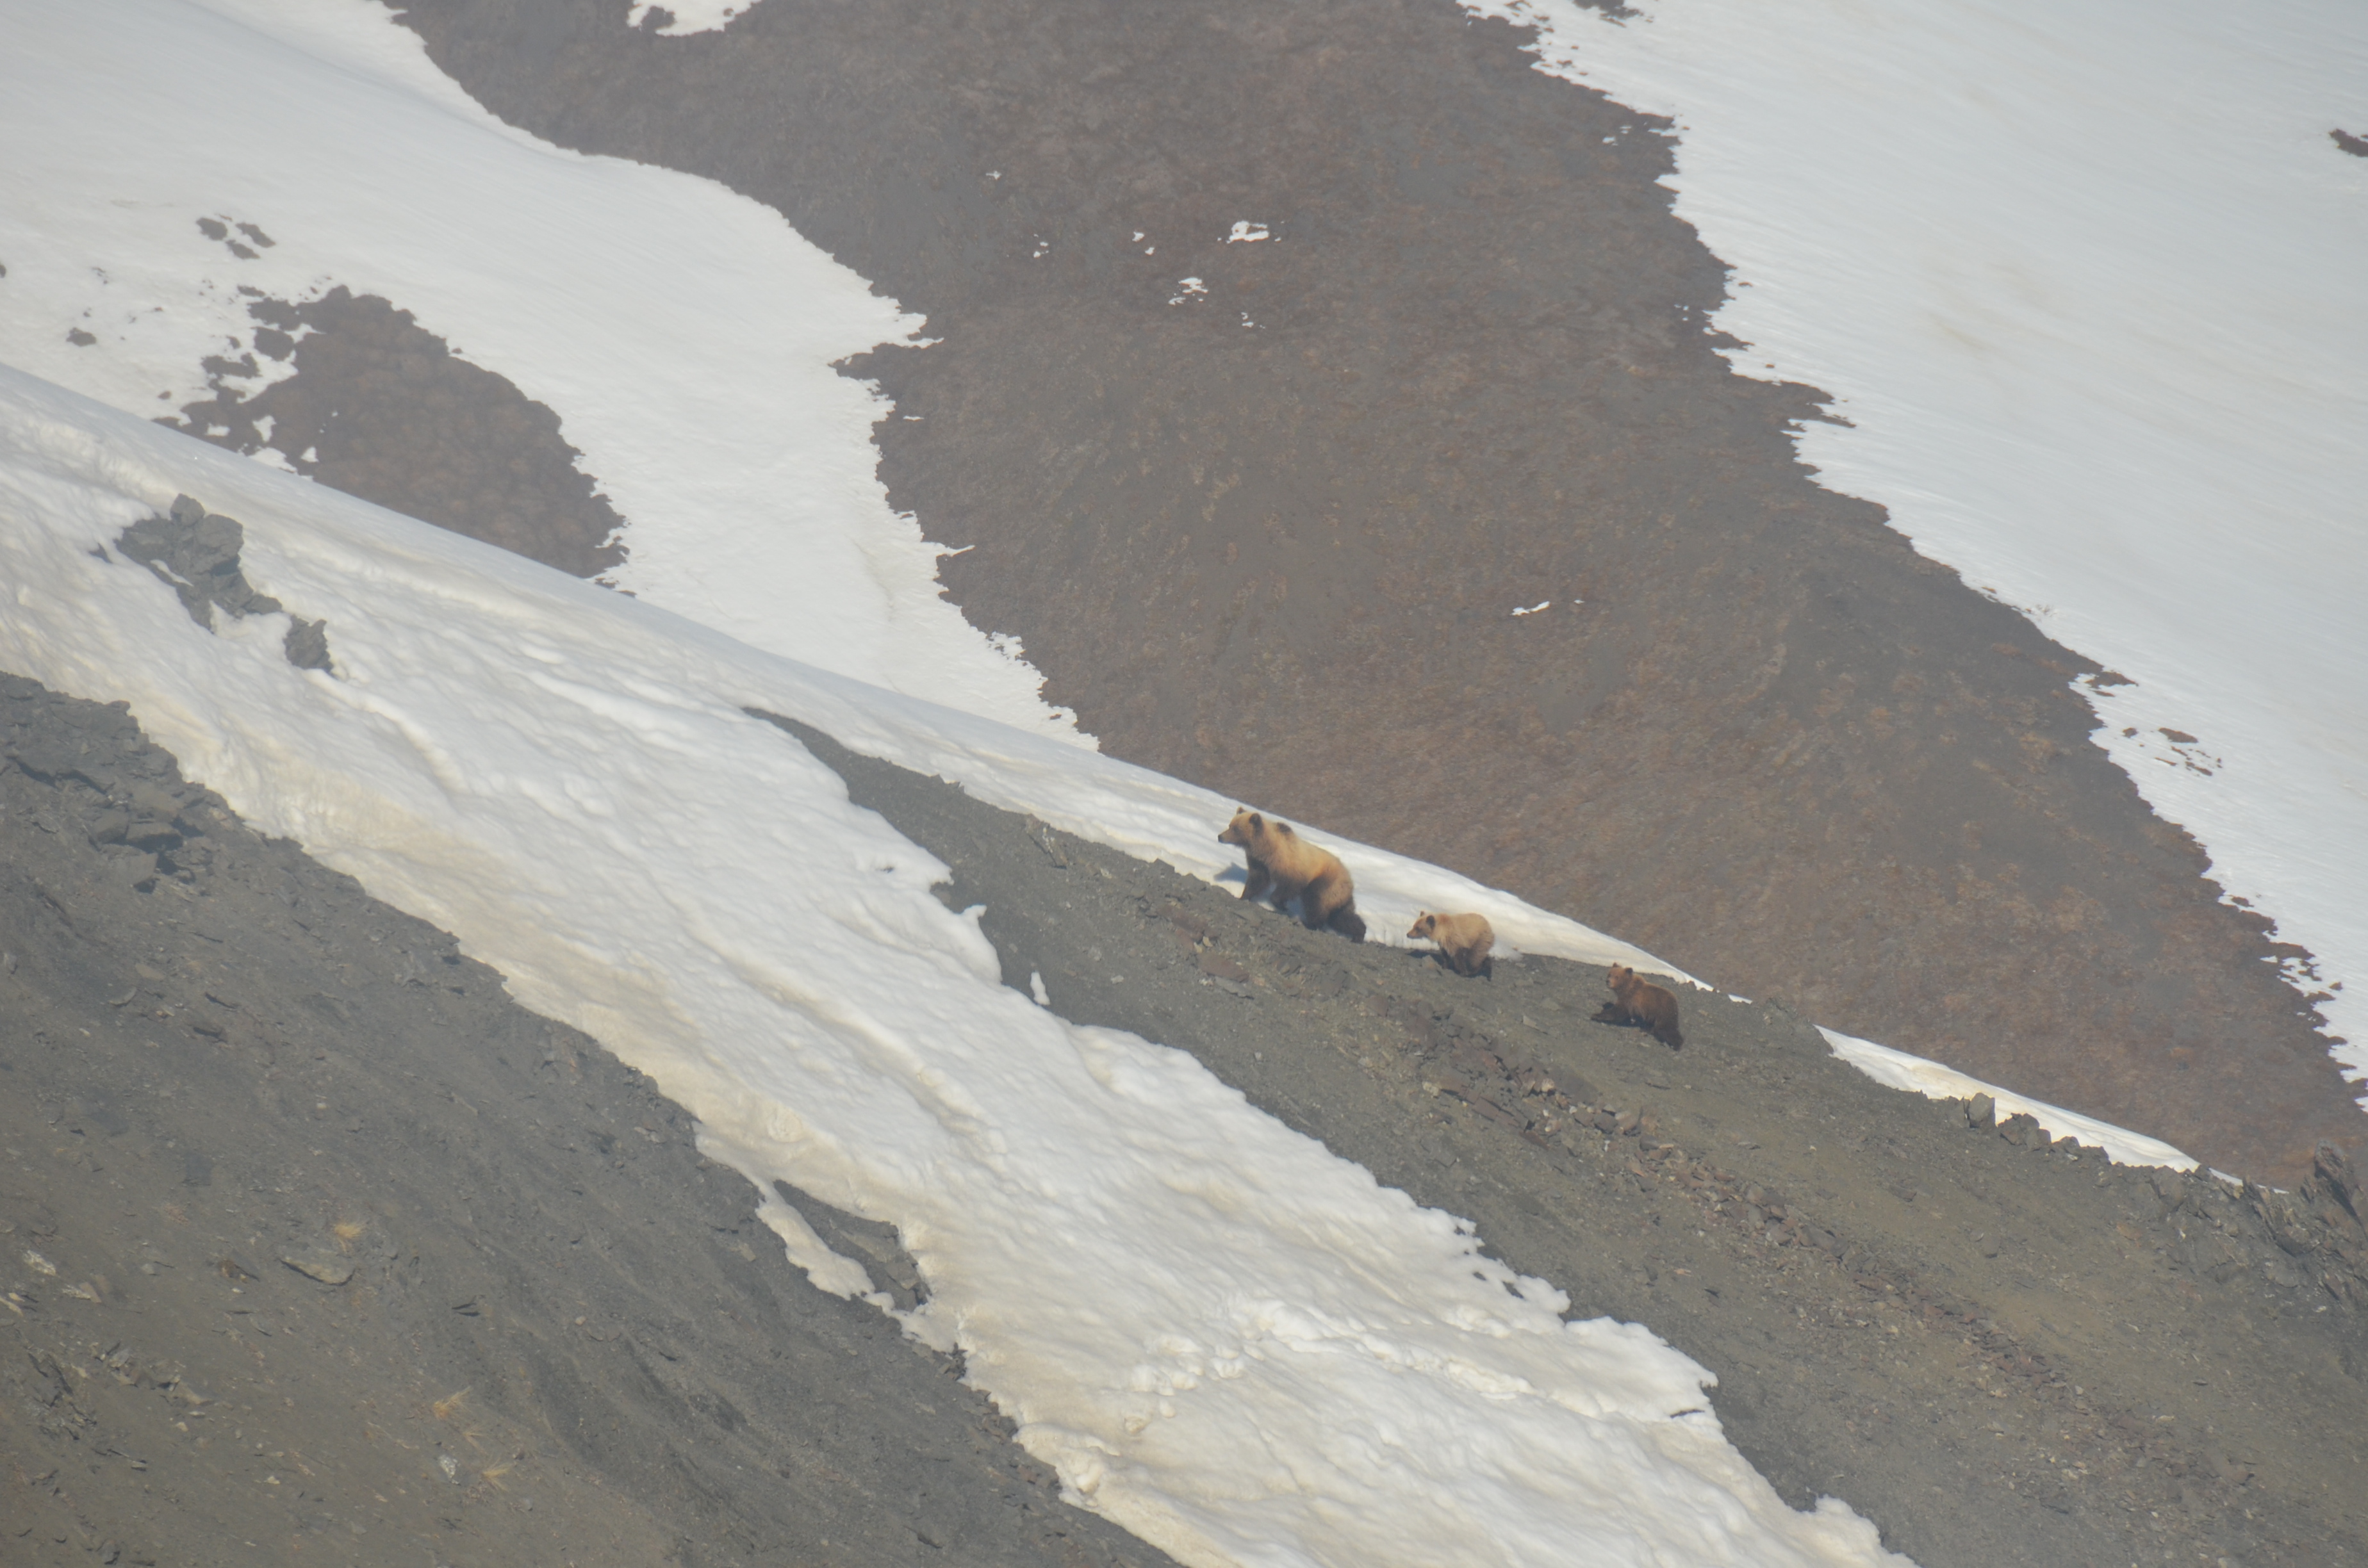 A bear family walks together across the tundra, between patches of snow. Photo by NPS/D. Vinson.